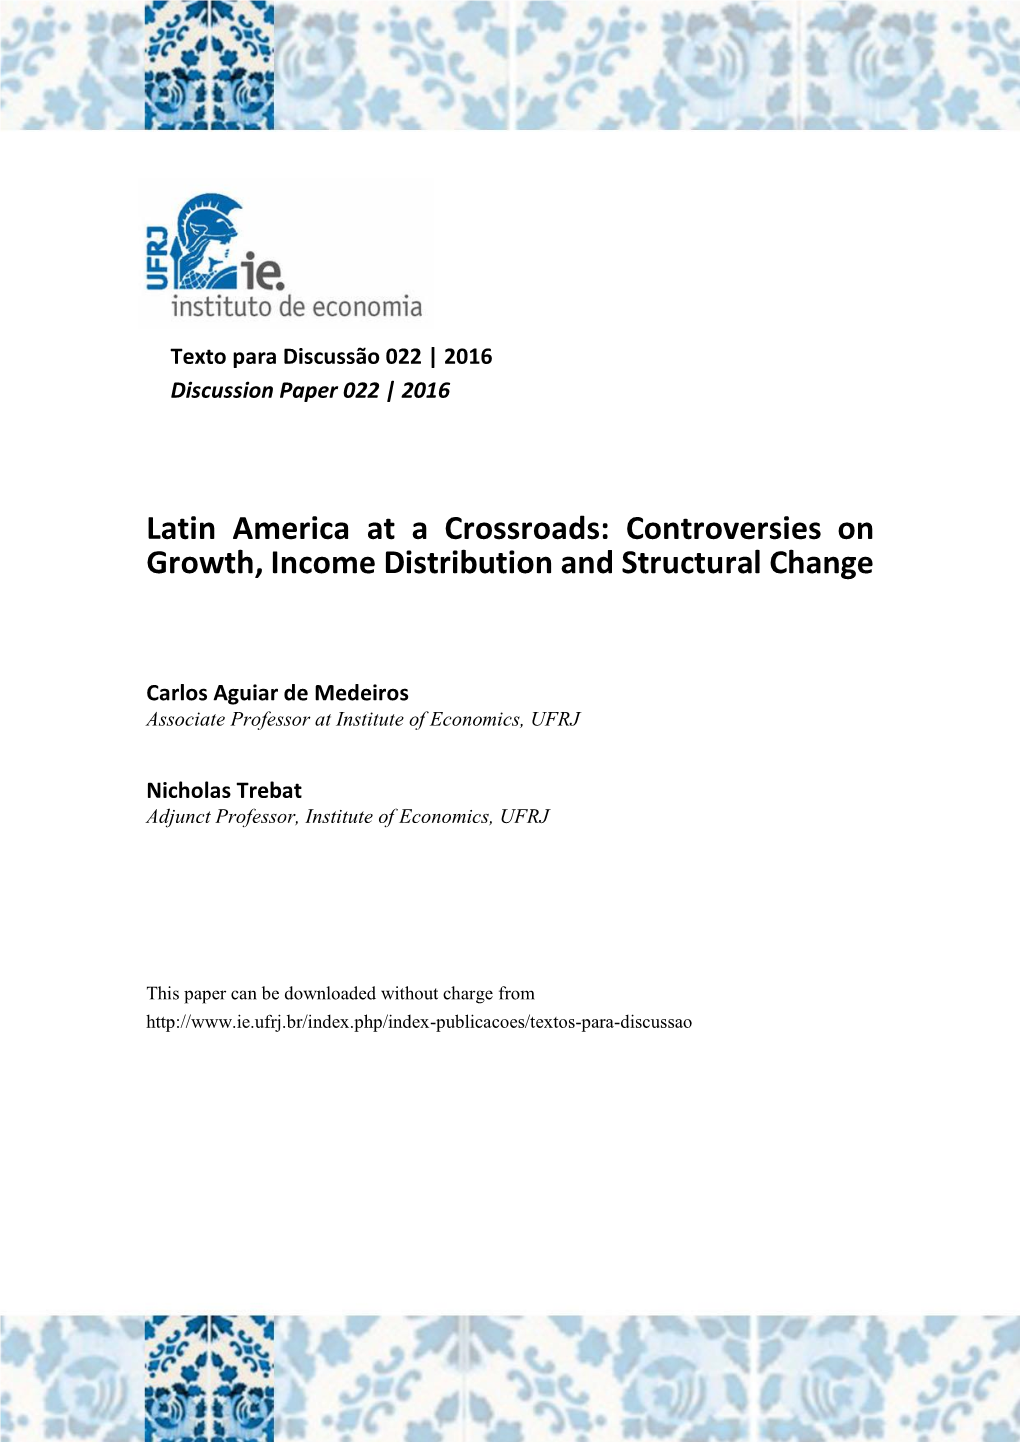 Controversies on Growth, Income Distribution and Structural Change